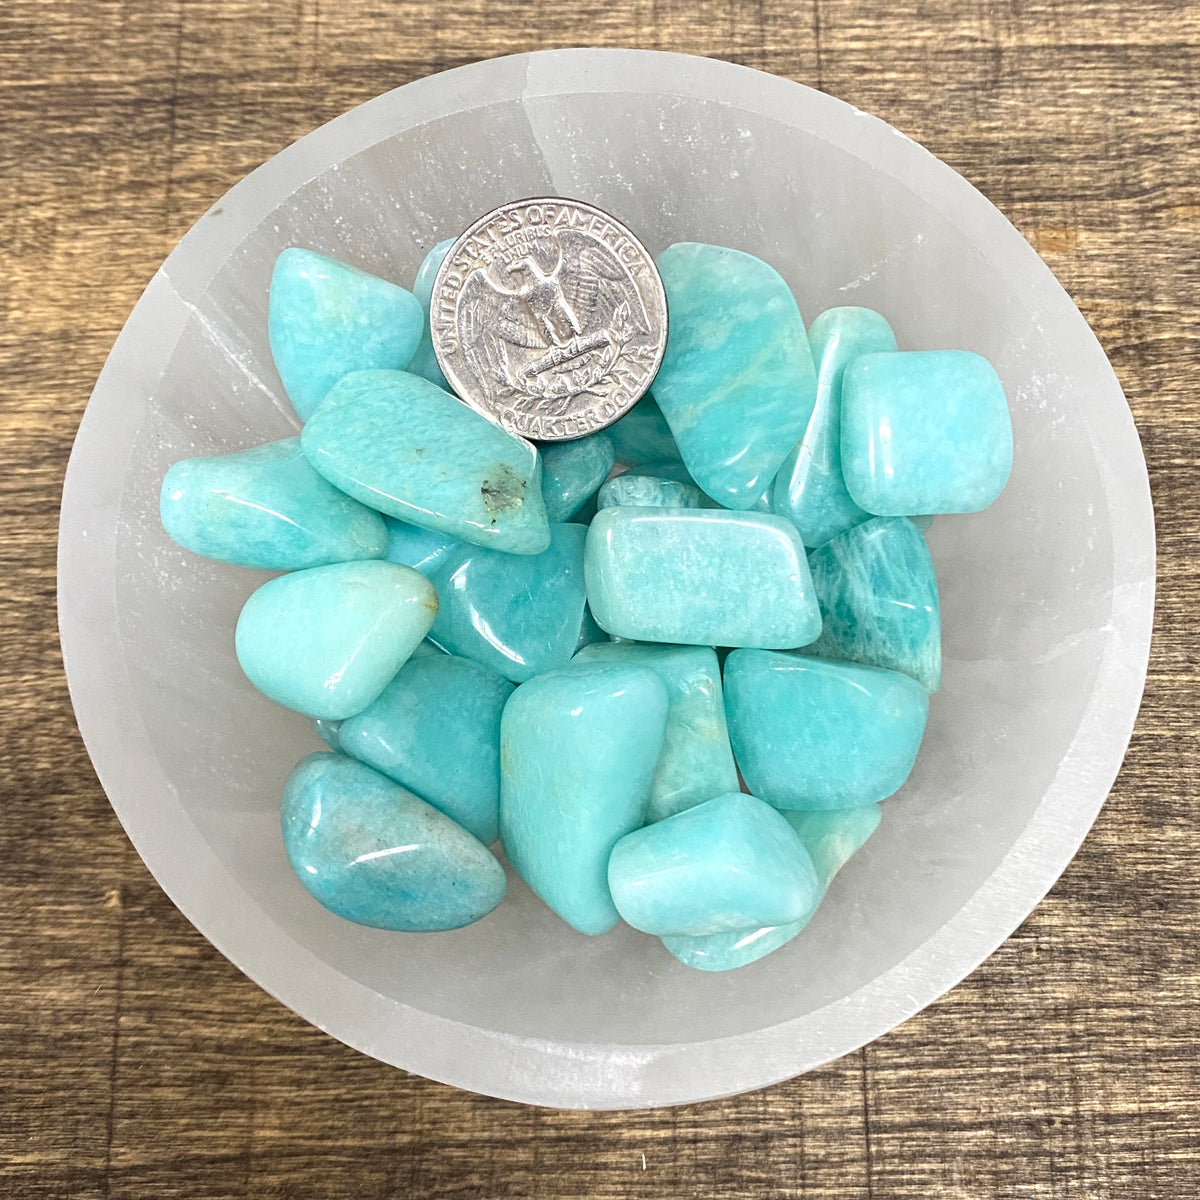 Overhead comparison shot of a US quarter coin and various Amazonite tumbled stones in a small bowl.